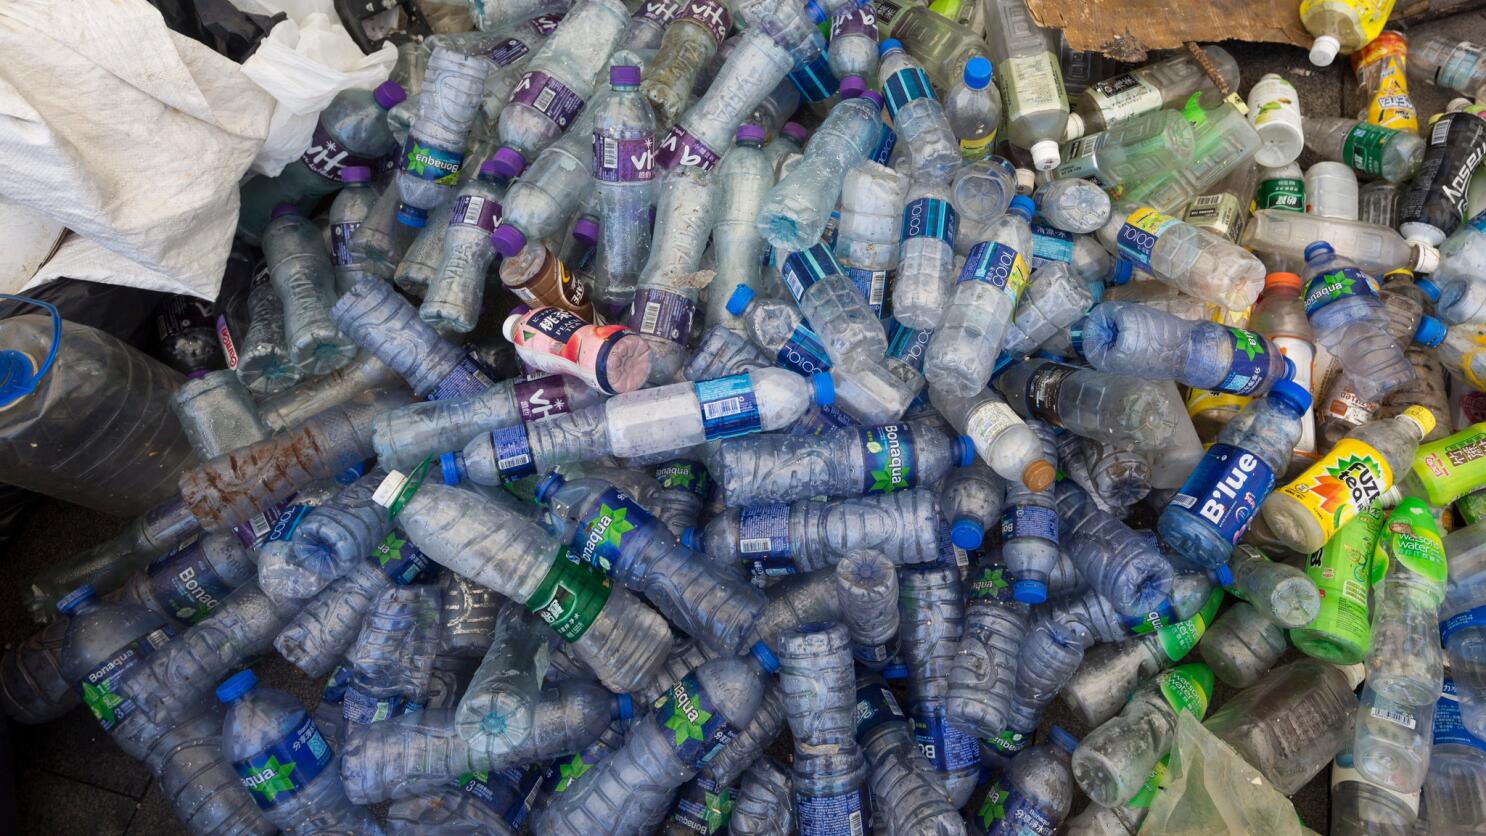 A Look At Concord's Plastic Water Bottle Ban, Five Years In